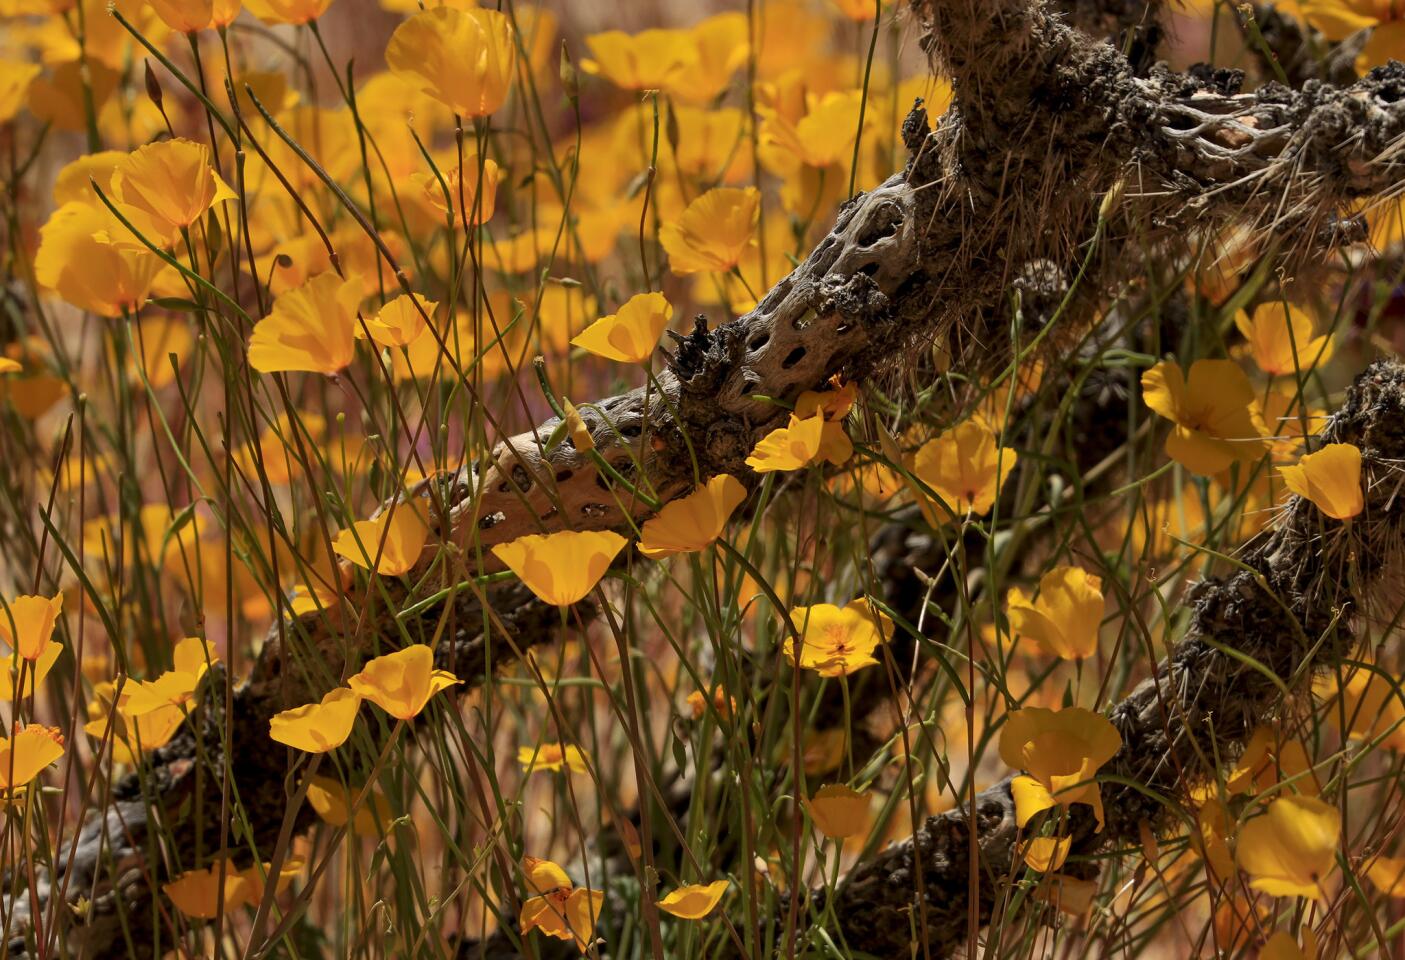 A swath of vibrant yellow wildflowers blooms in Joshua Tree National Park.